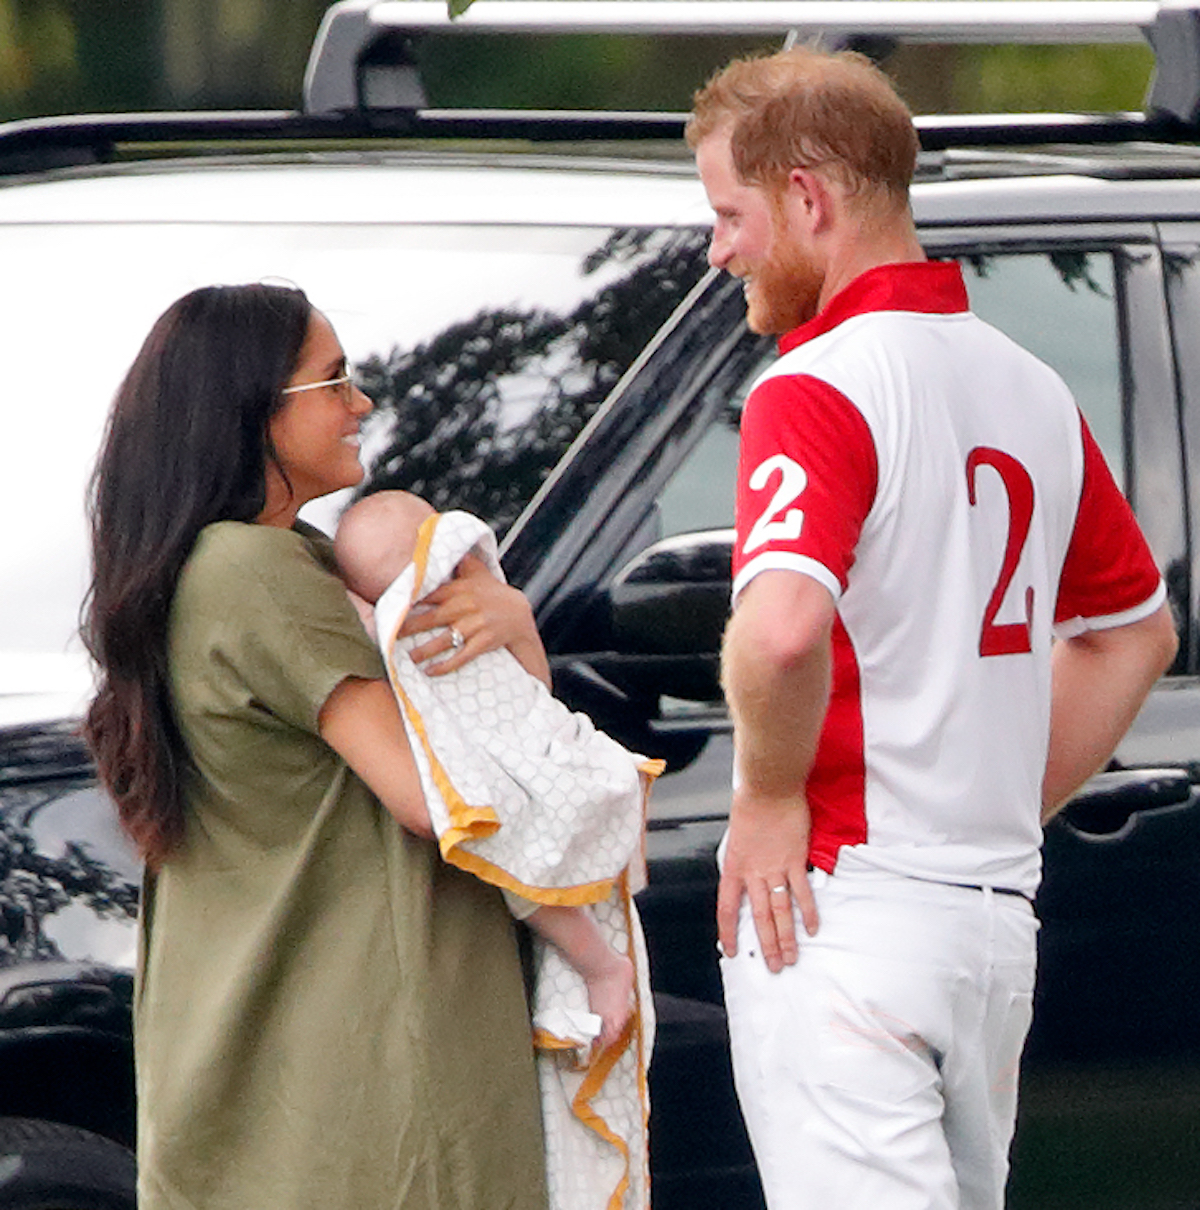 Meghan Markle, whose recent polo appearances an expert says could be 'trouble,' holds baby Archie as Prince Harry smiles